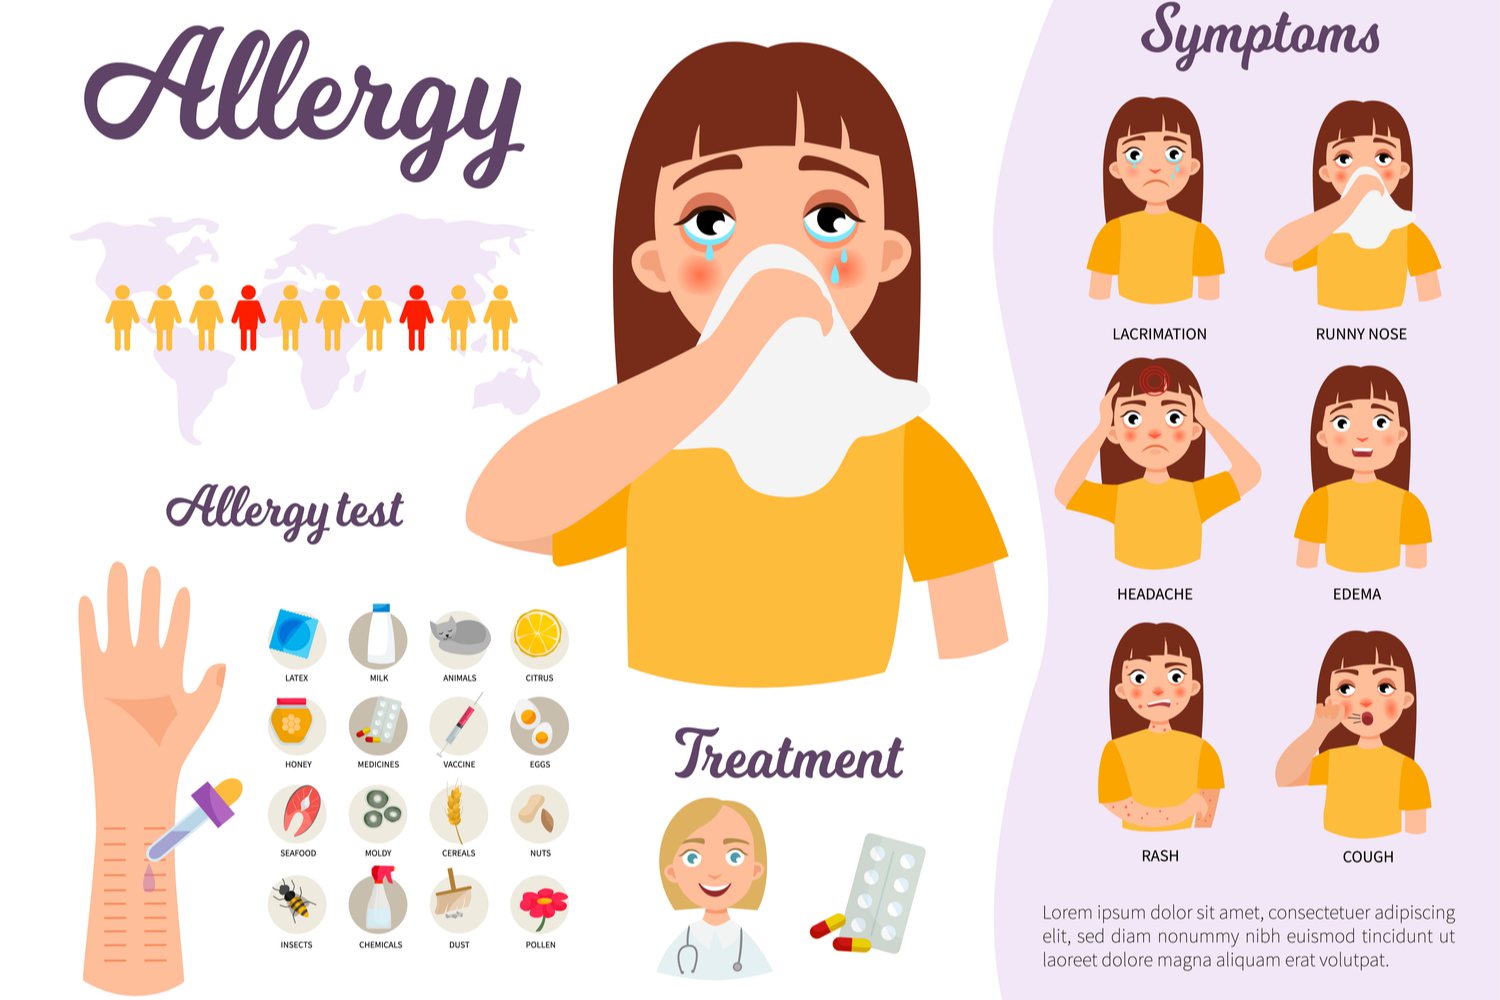 Types of Allergies in Children and The Reactions